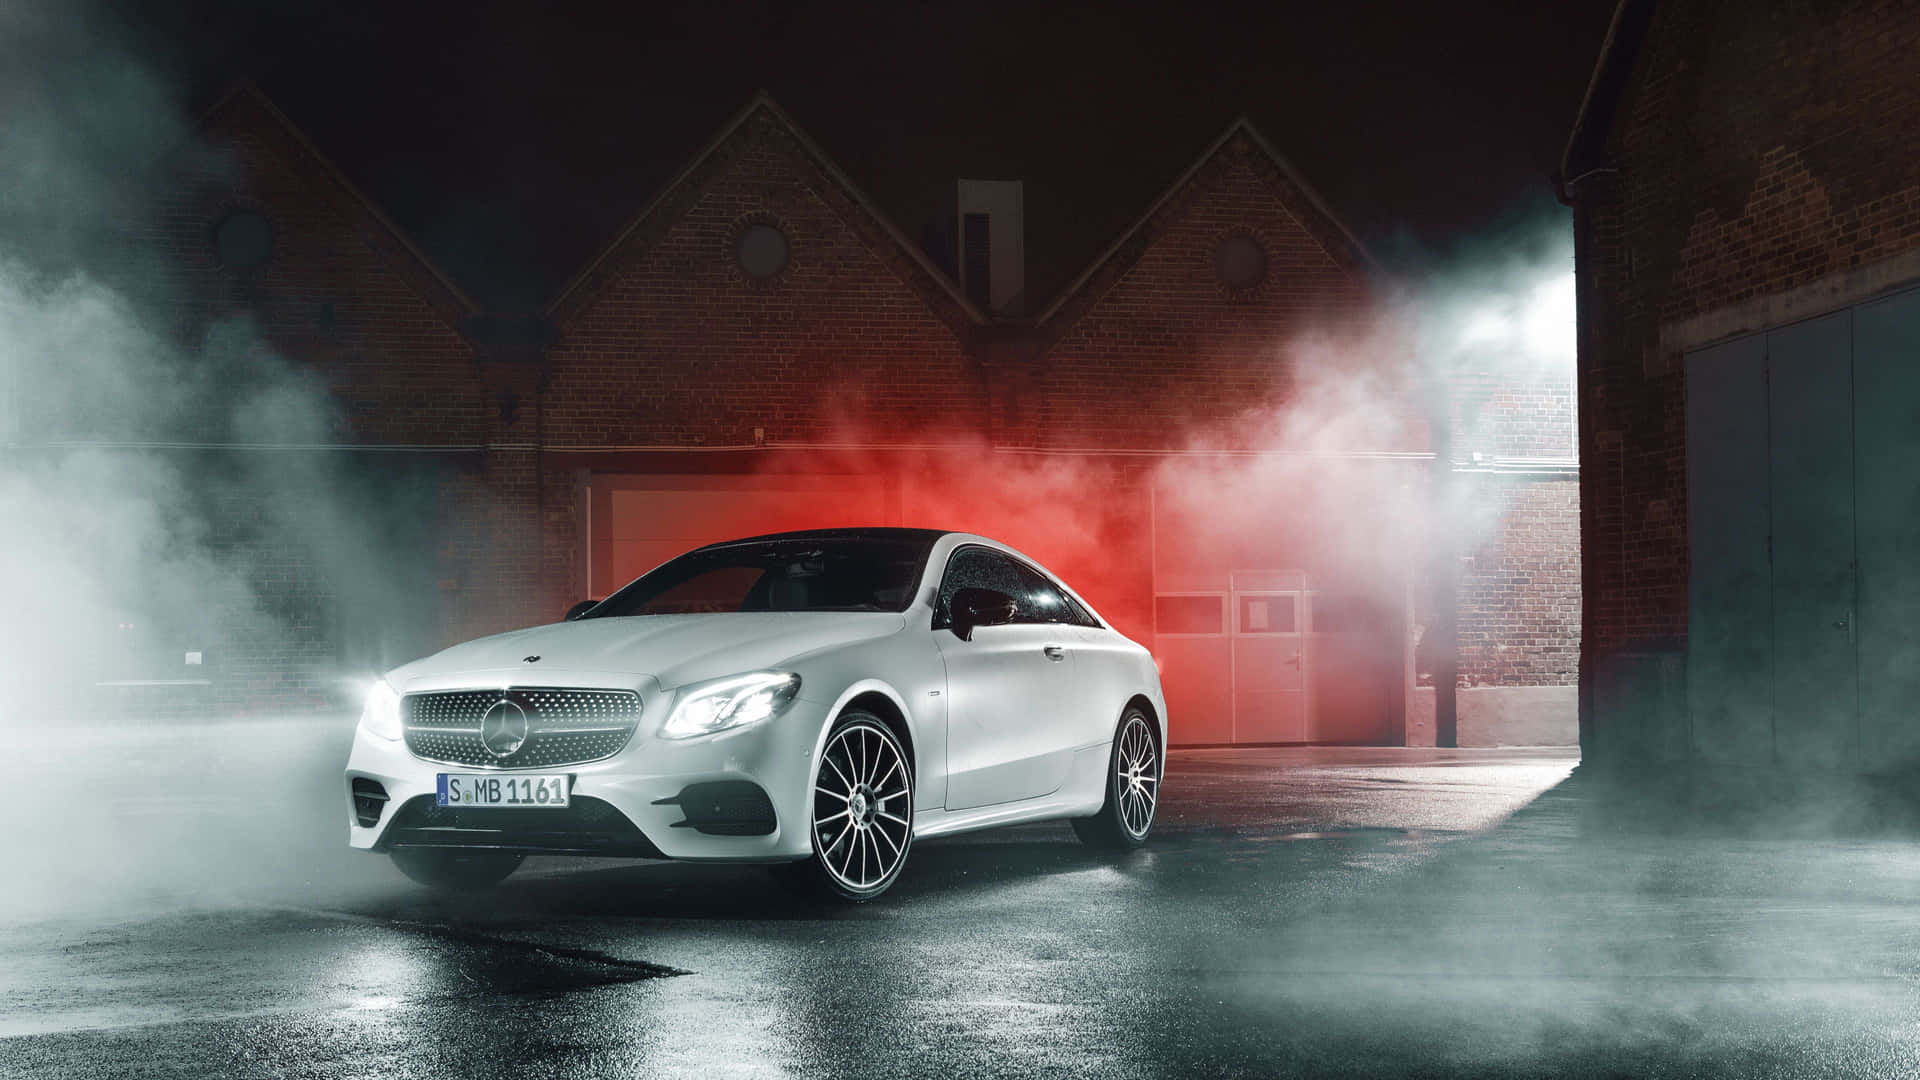 Take Luxury to New Heights With the Mercedes Benz Clase E Wallpaper